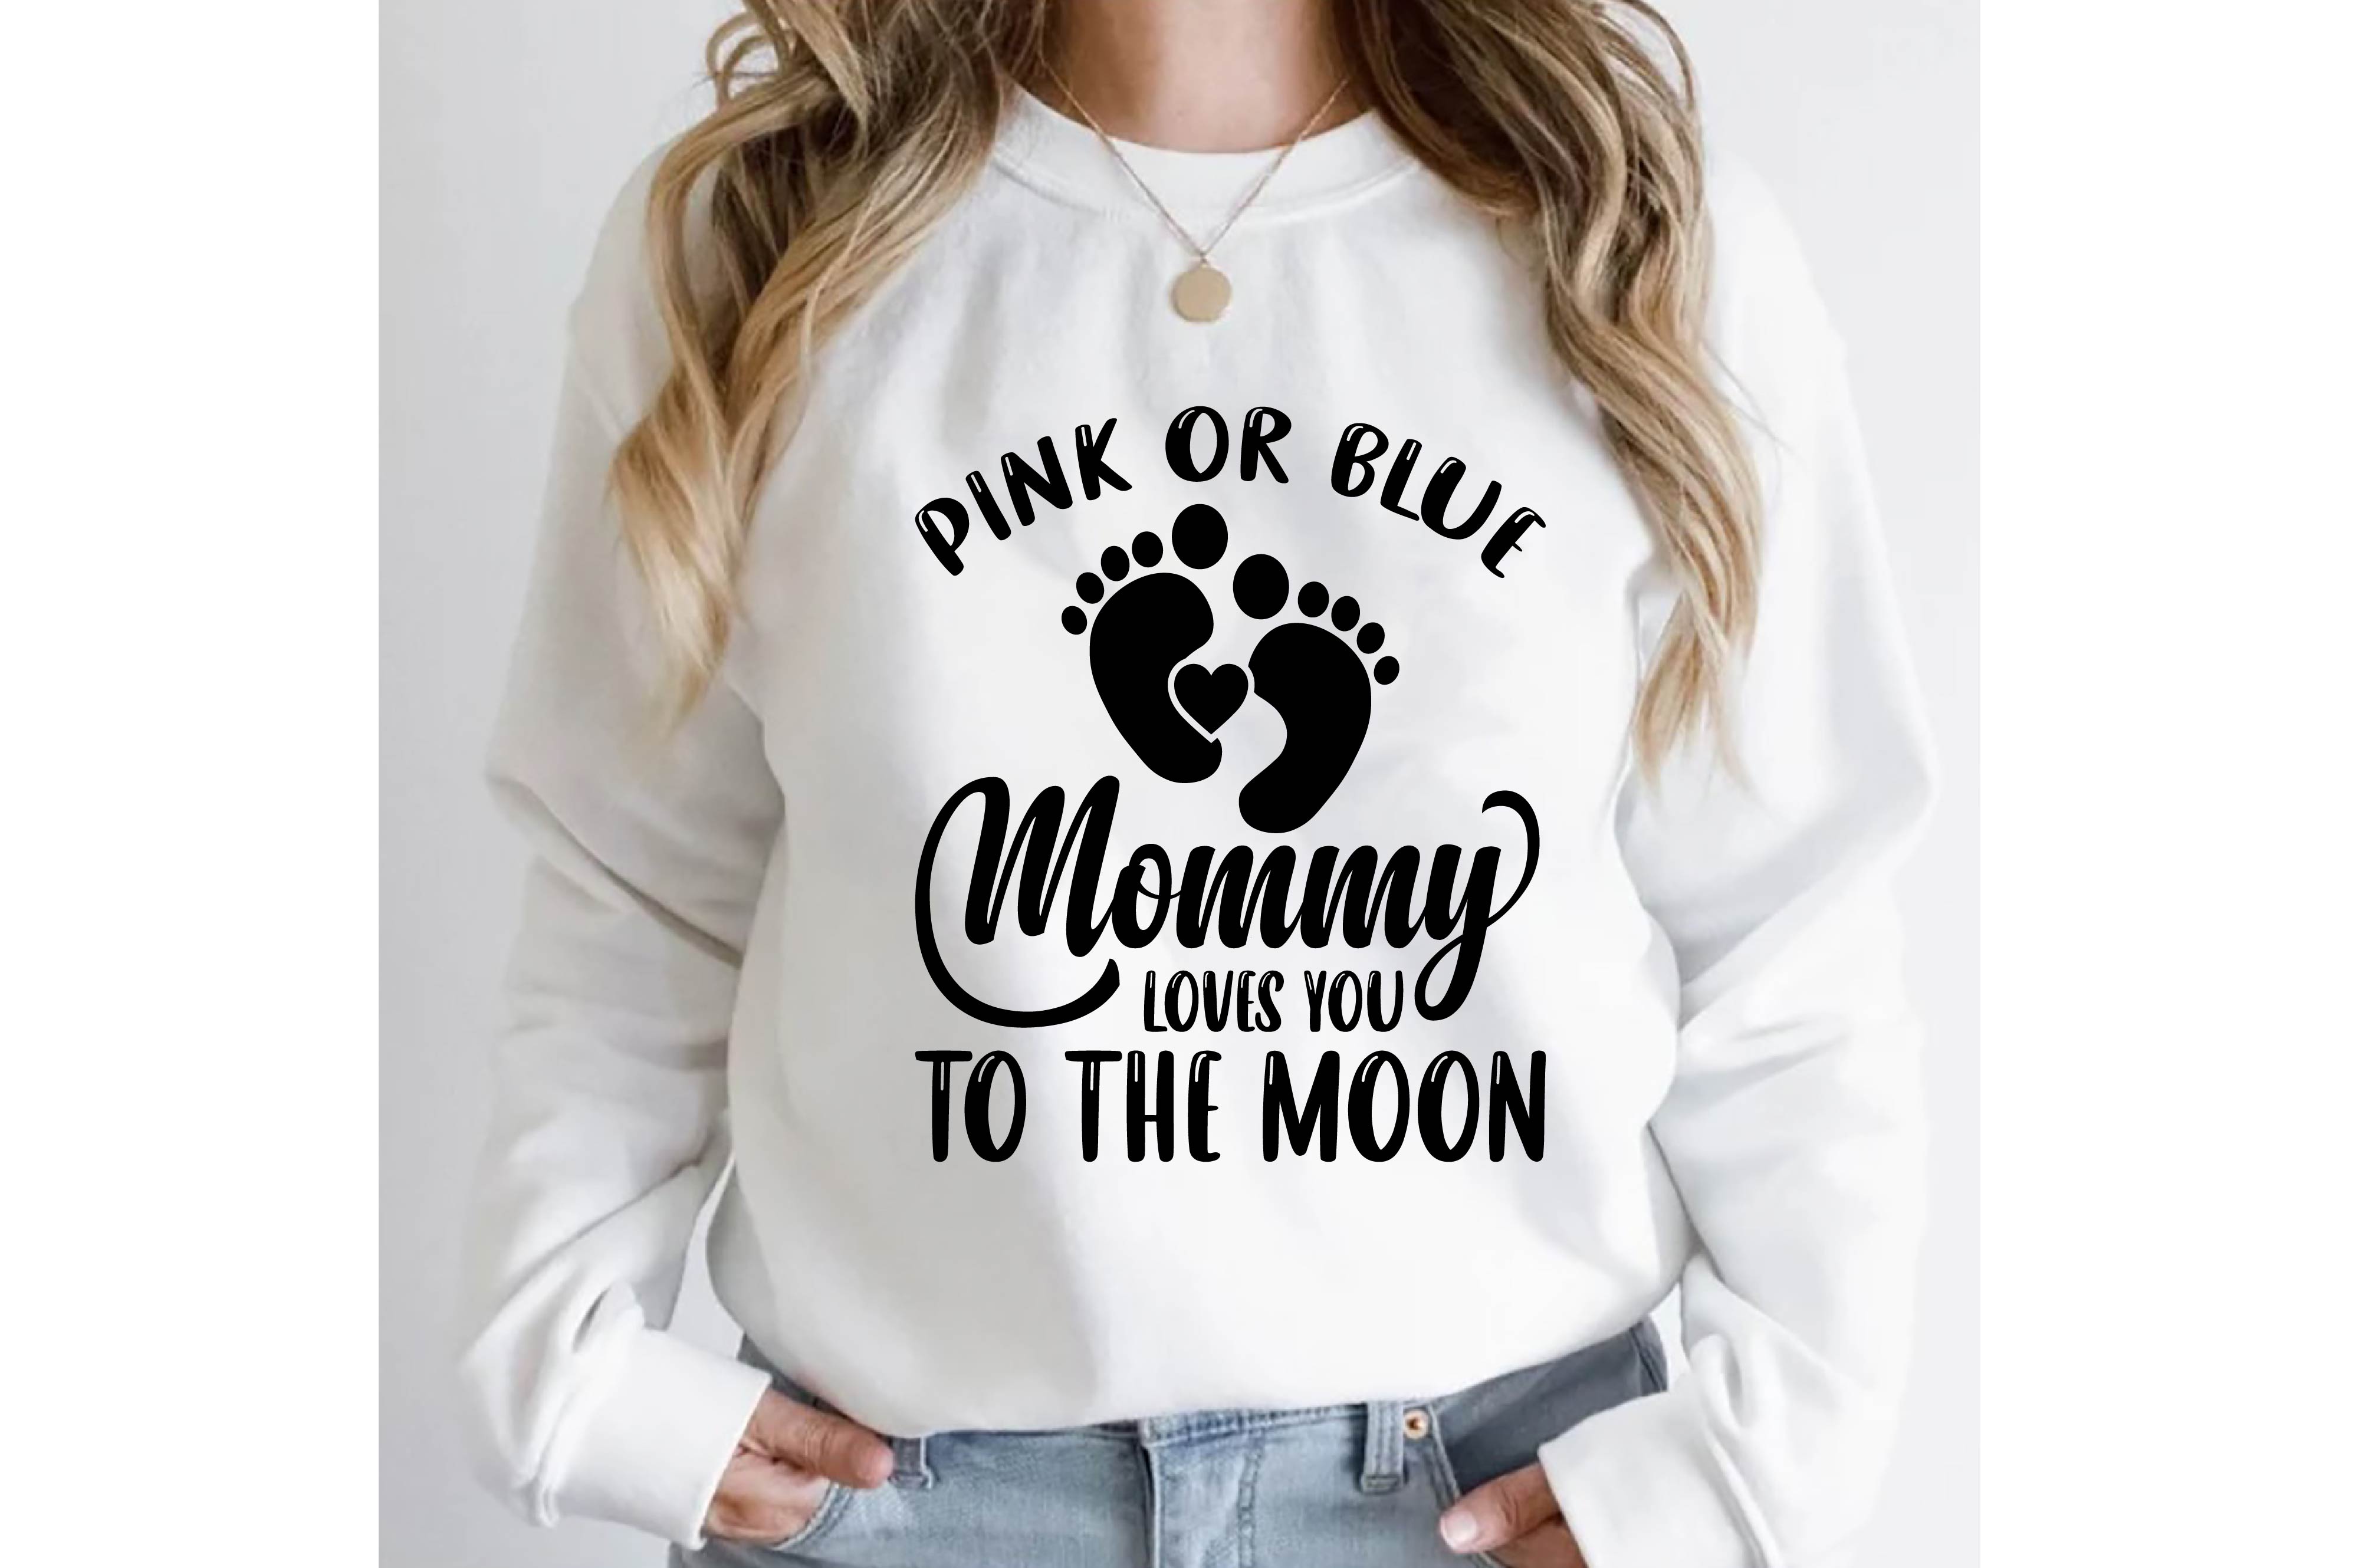 Woman wearing a sweatshirt that says pink or blue mommy to the moon.